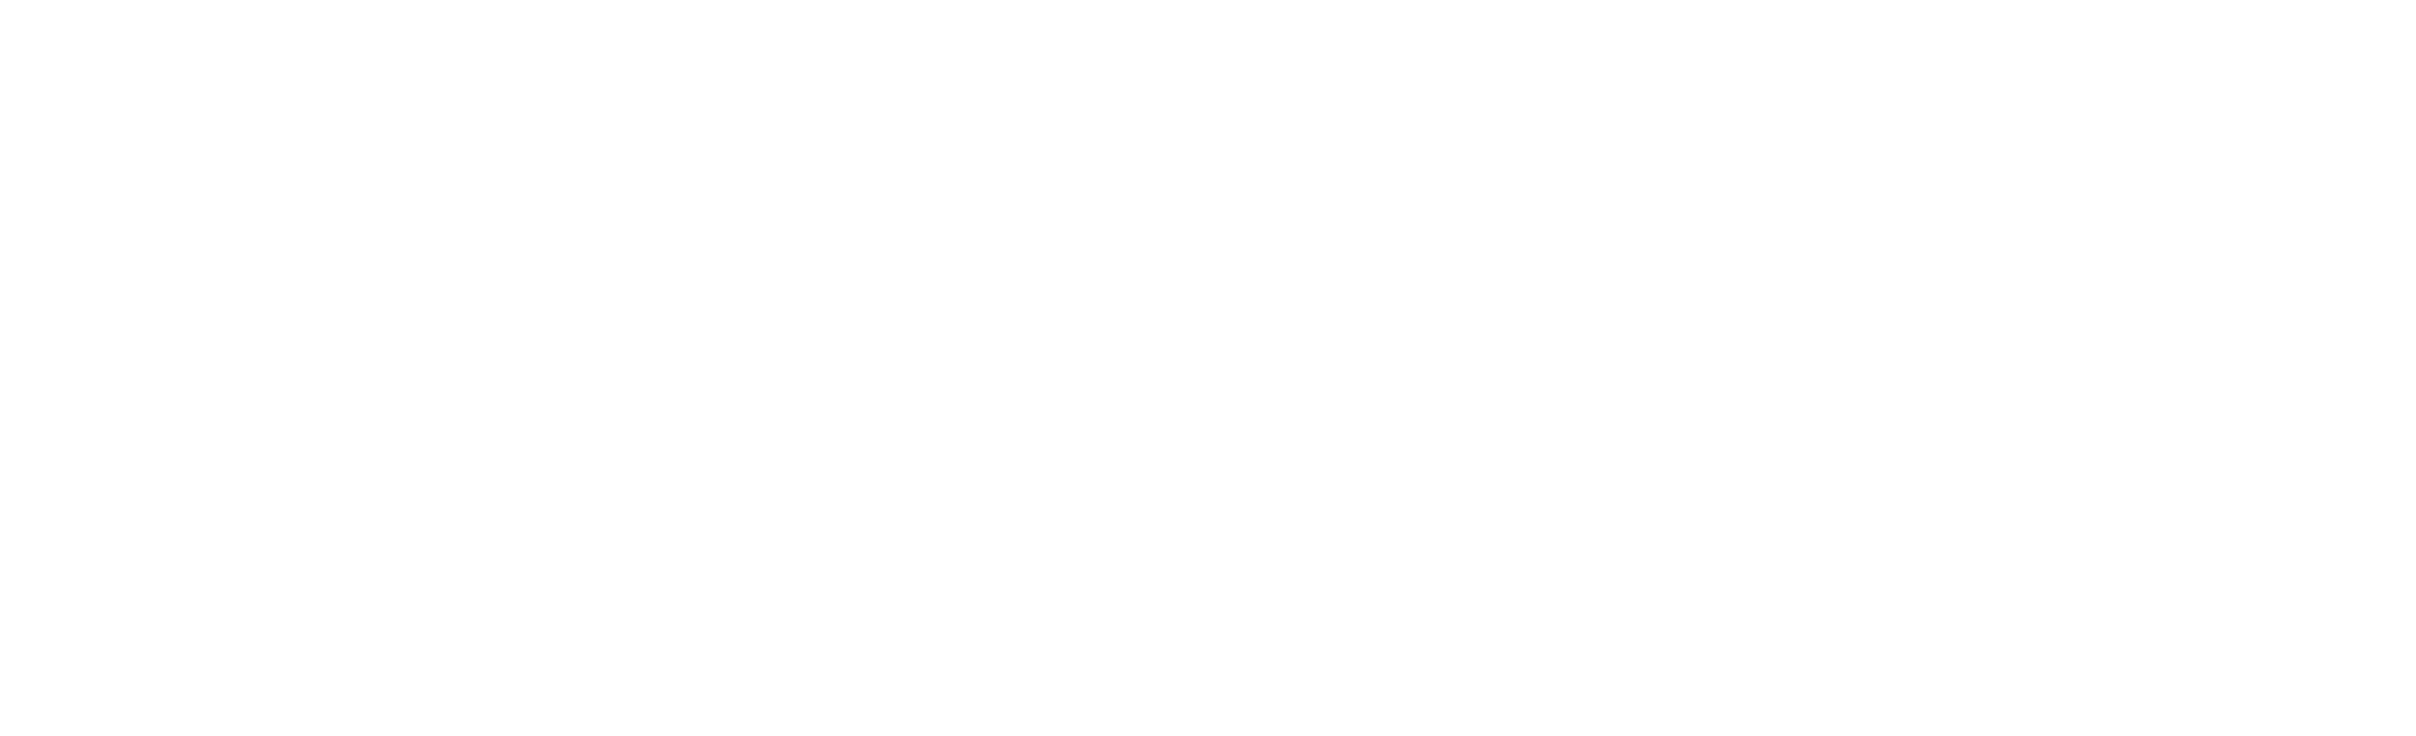 Cloud 9 Music - Amsterdam based record label and music publisher